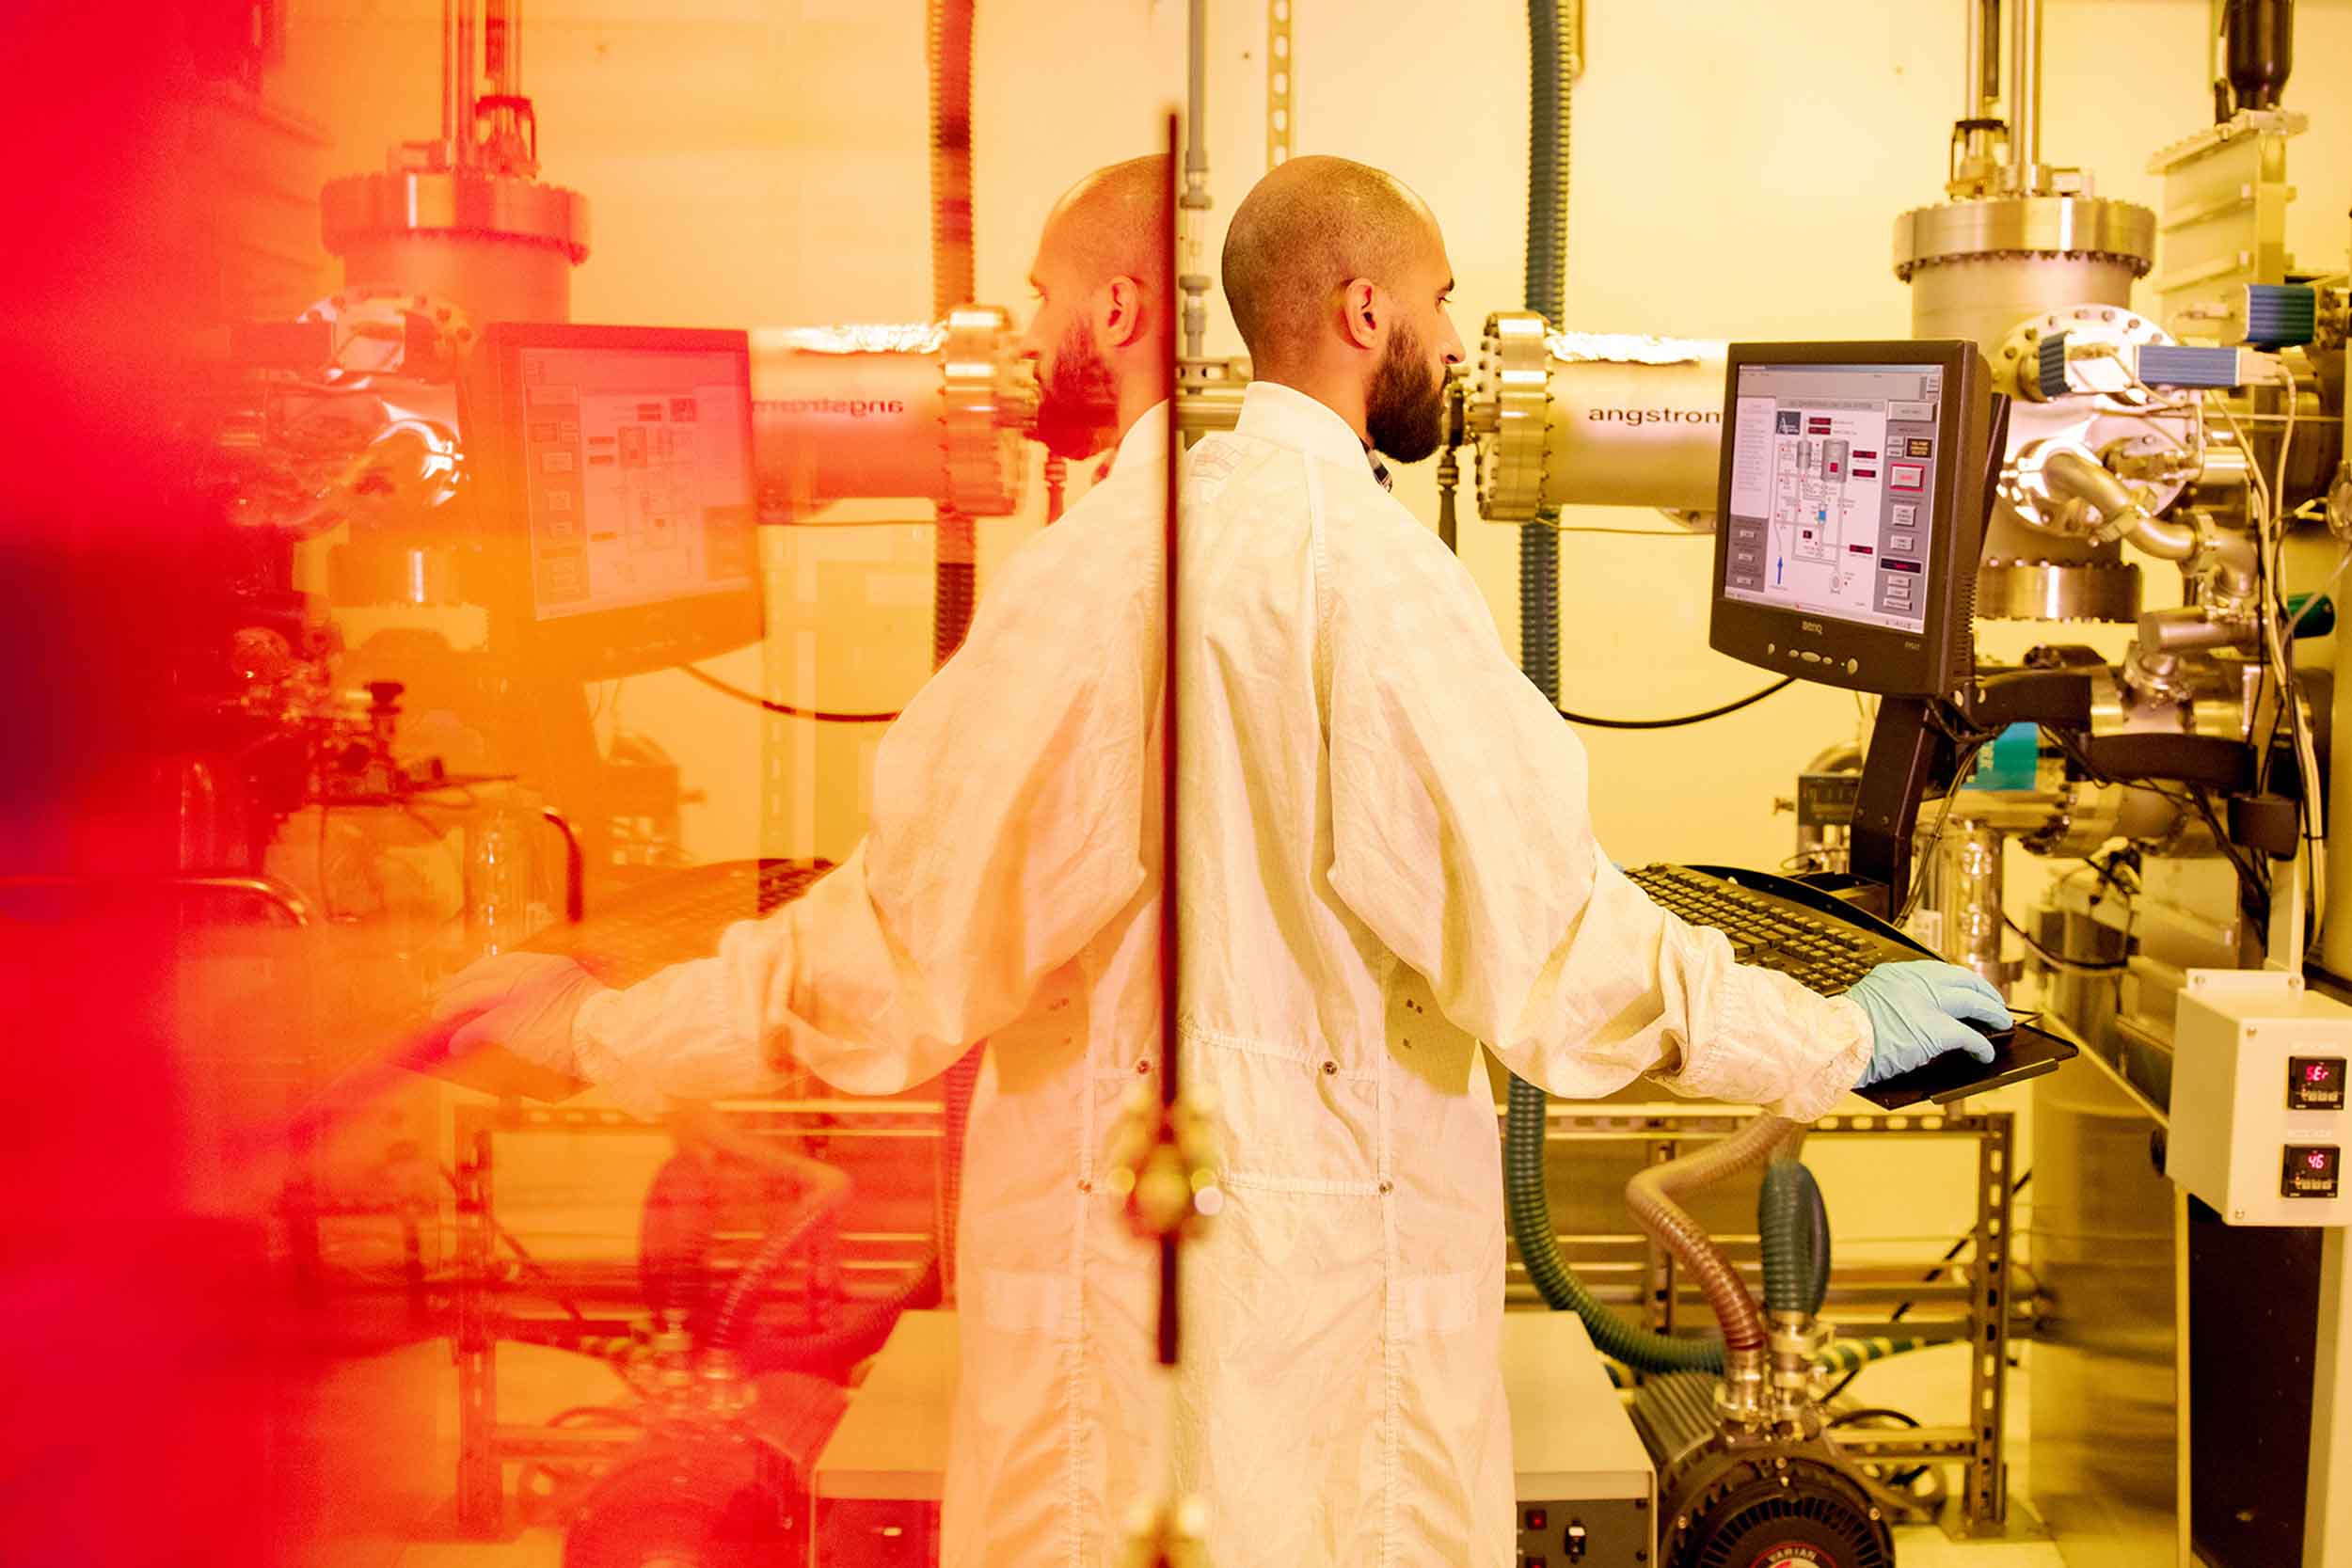 ASU Researcher Wahab Alasfour stands at a computer in his lab wearing a lab coat, working on his semiconductor research